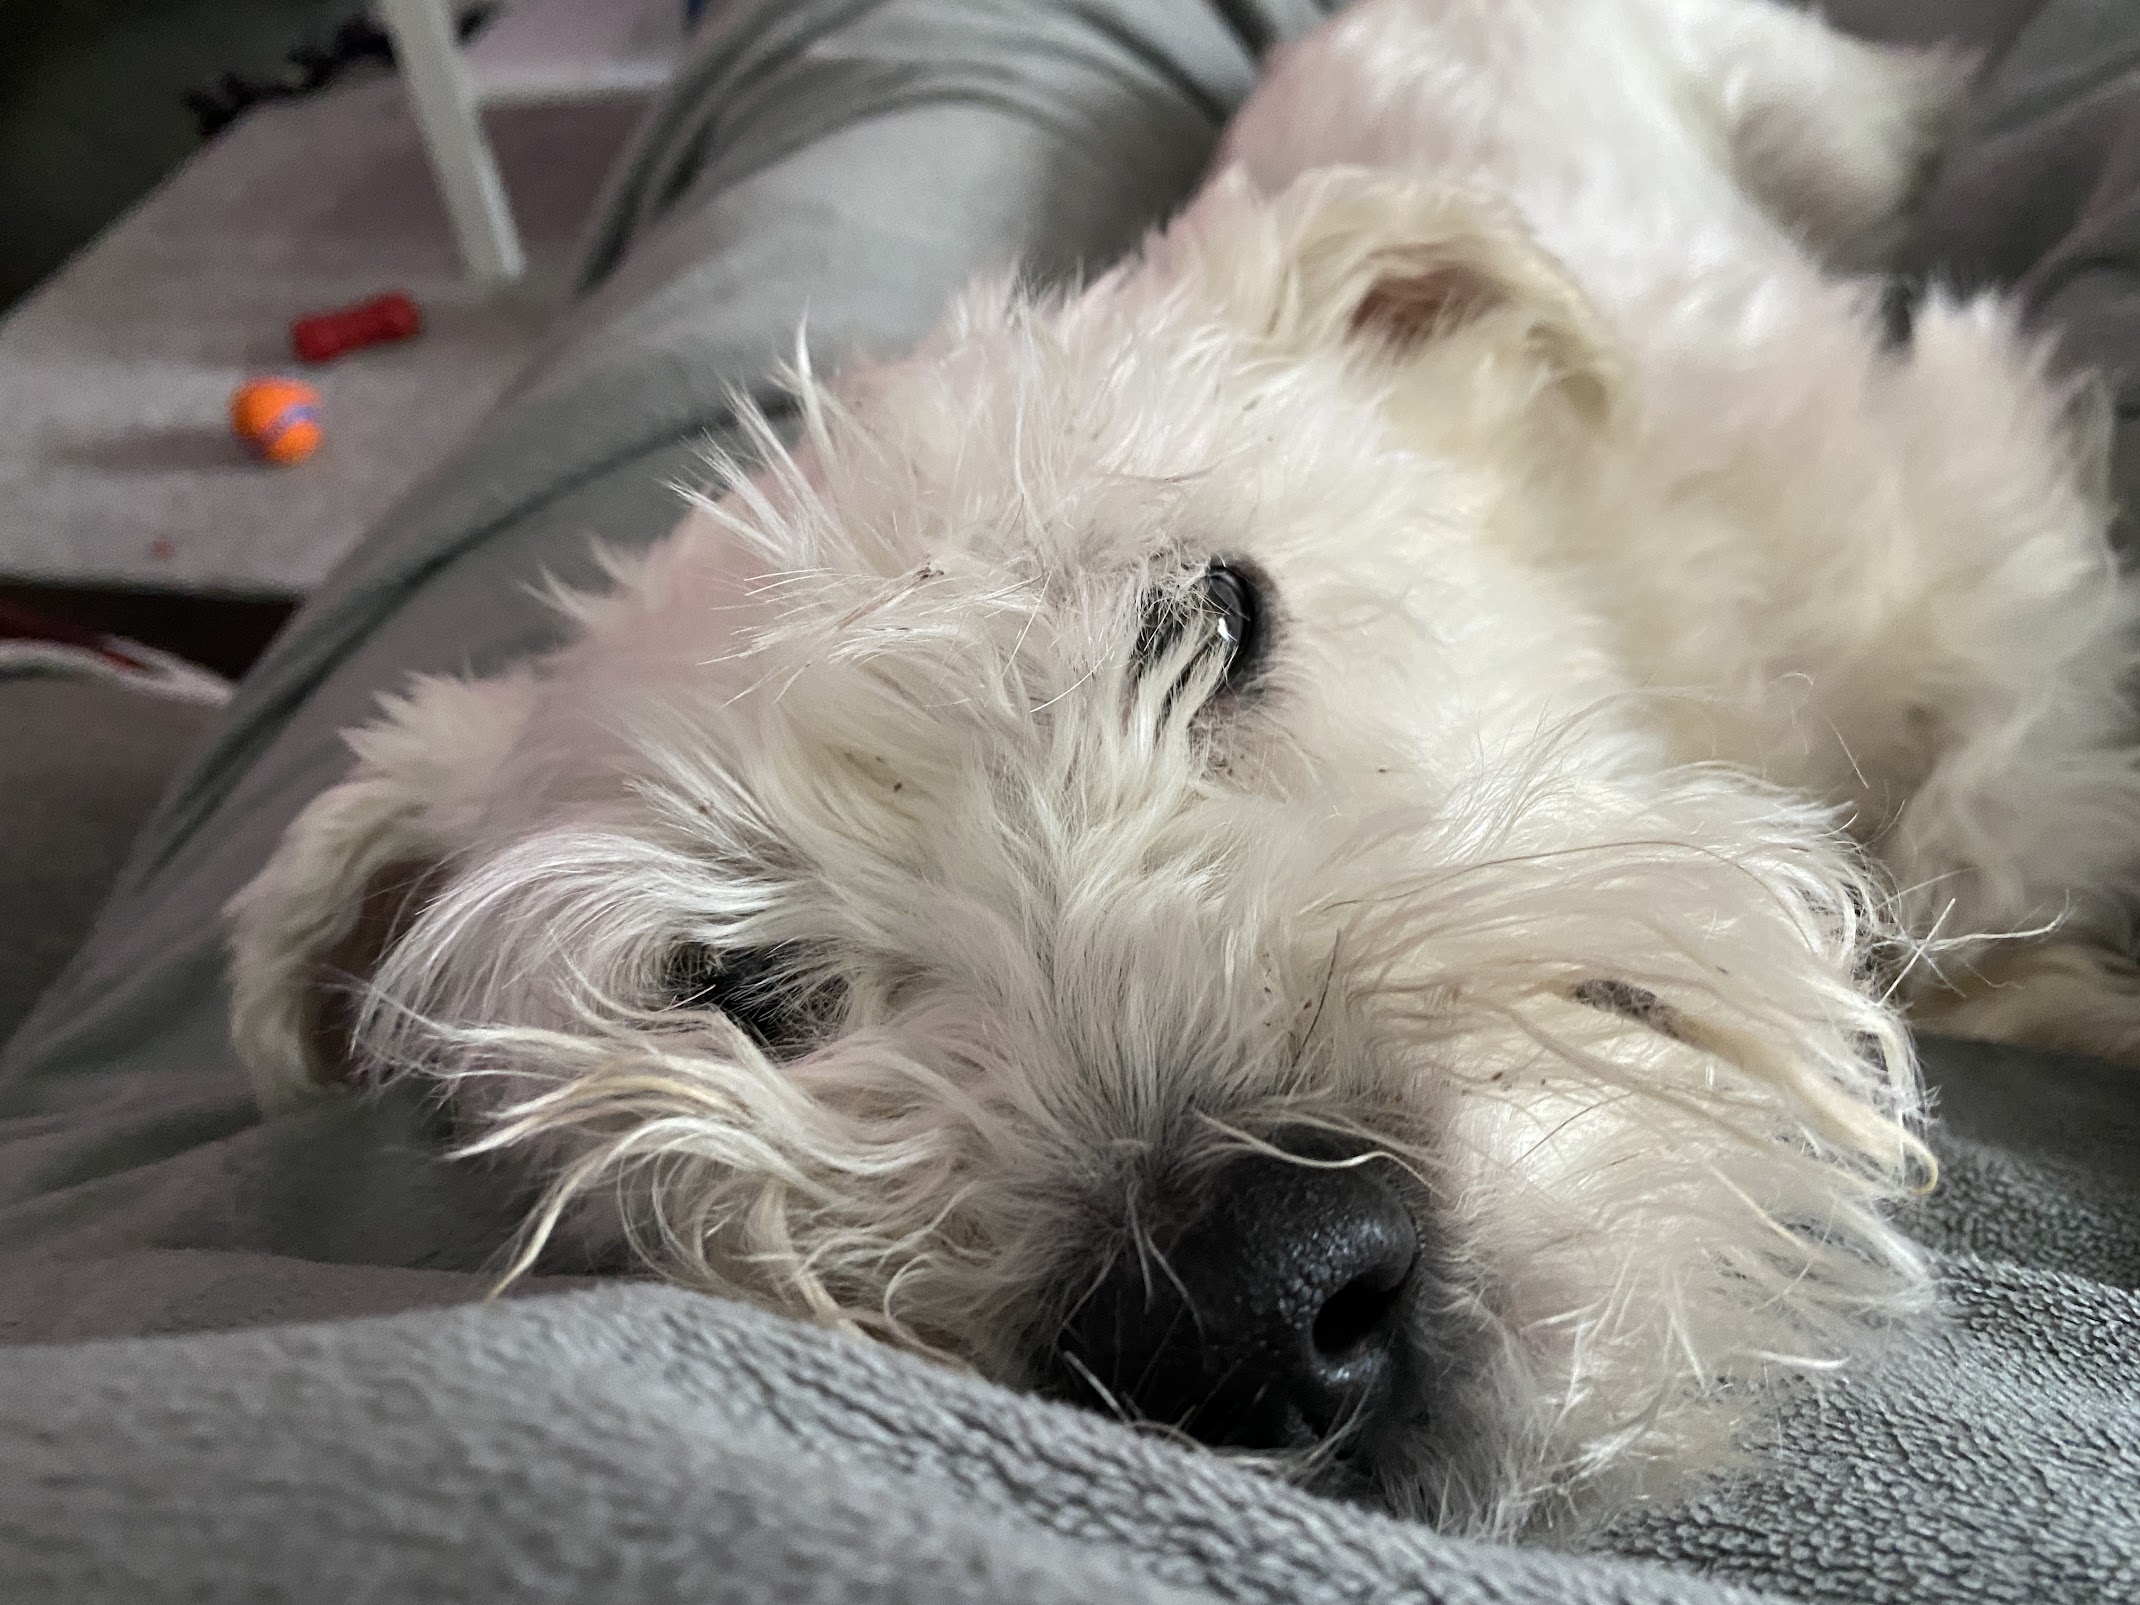 Fluffy white dog stares lovingly into camera while lying on grey blanket covering owner's lap